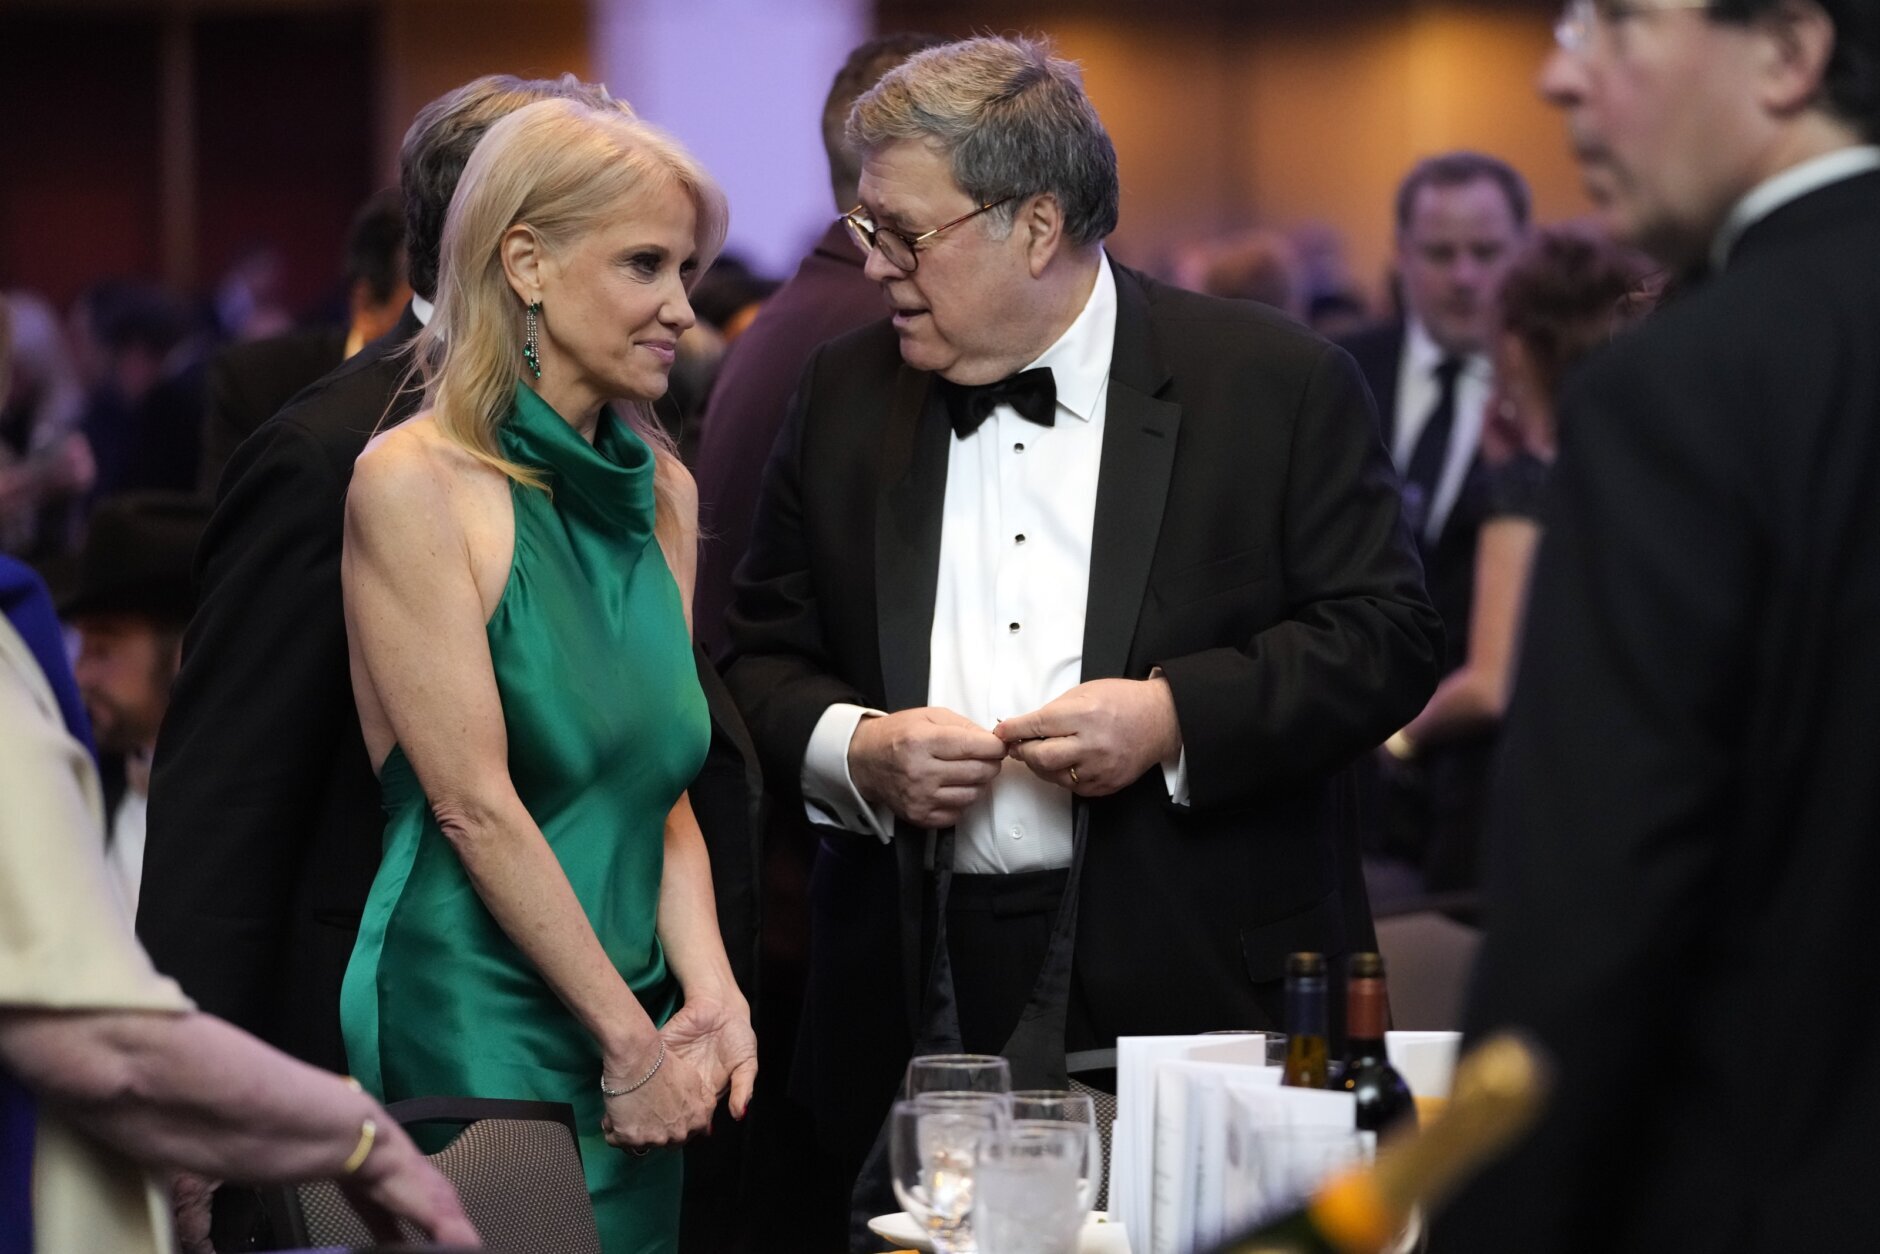 Known for laughs, DC dinner spotlights risks to journalism WTOP News